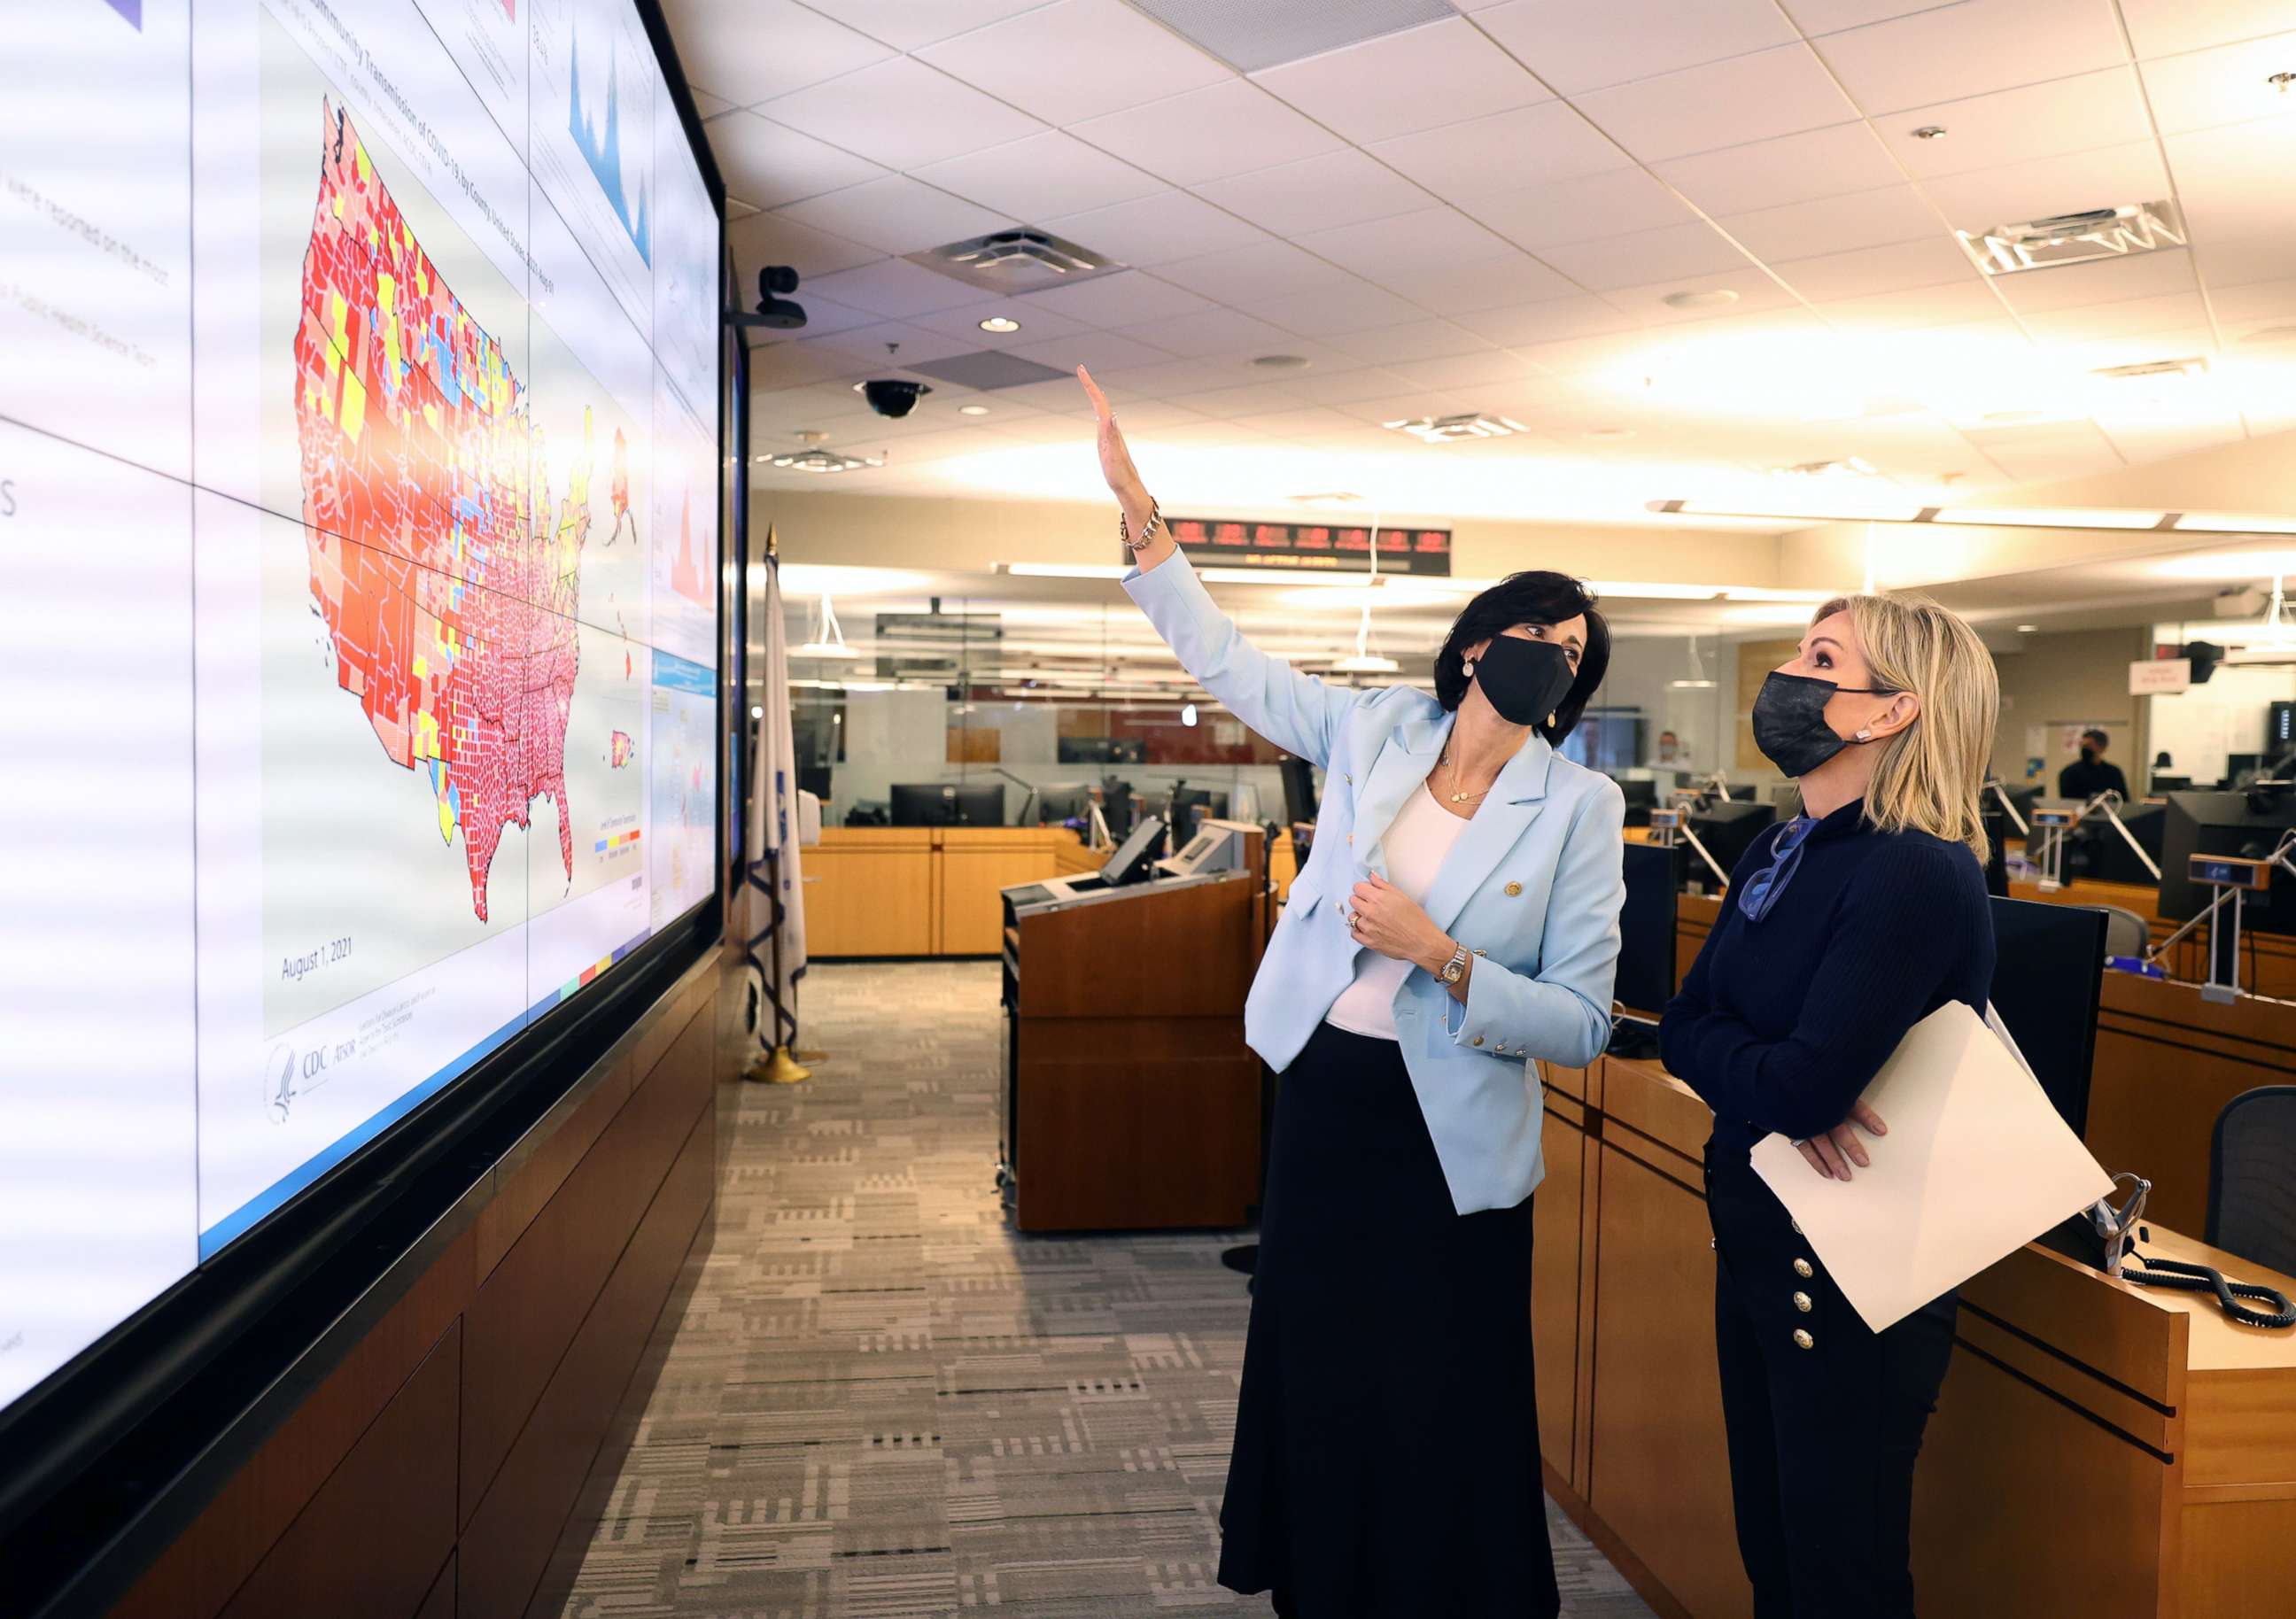 PHOTO: Dr. Jennifer Ashton, ABC News' chief medical correspondent, was given rare access inside the Centers for Disease Control and Prevetion's Emergency Operations Center in Atlanta by CDC Director Dr. Rochelle Walensky.